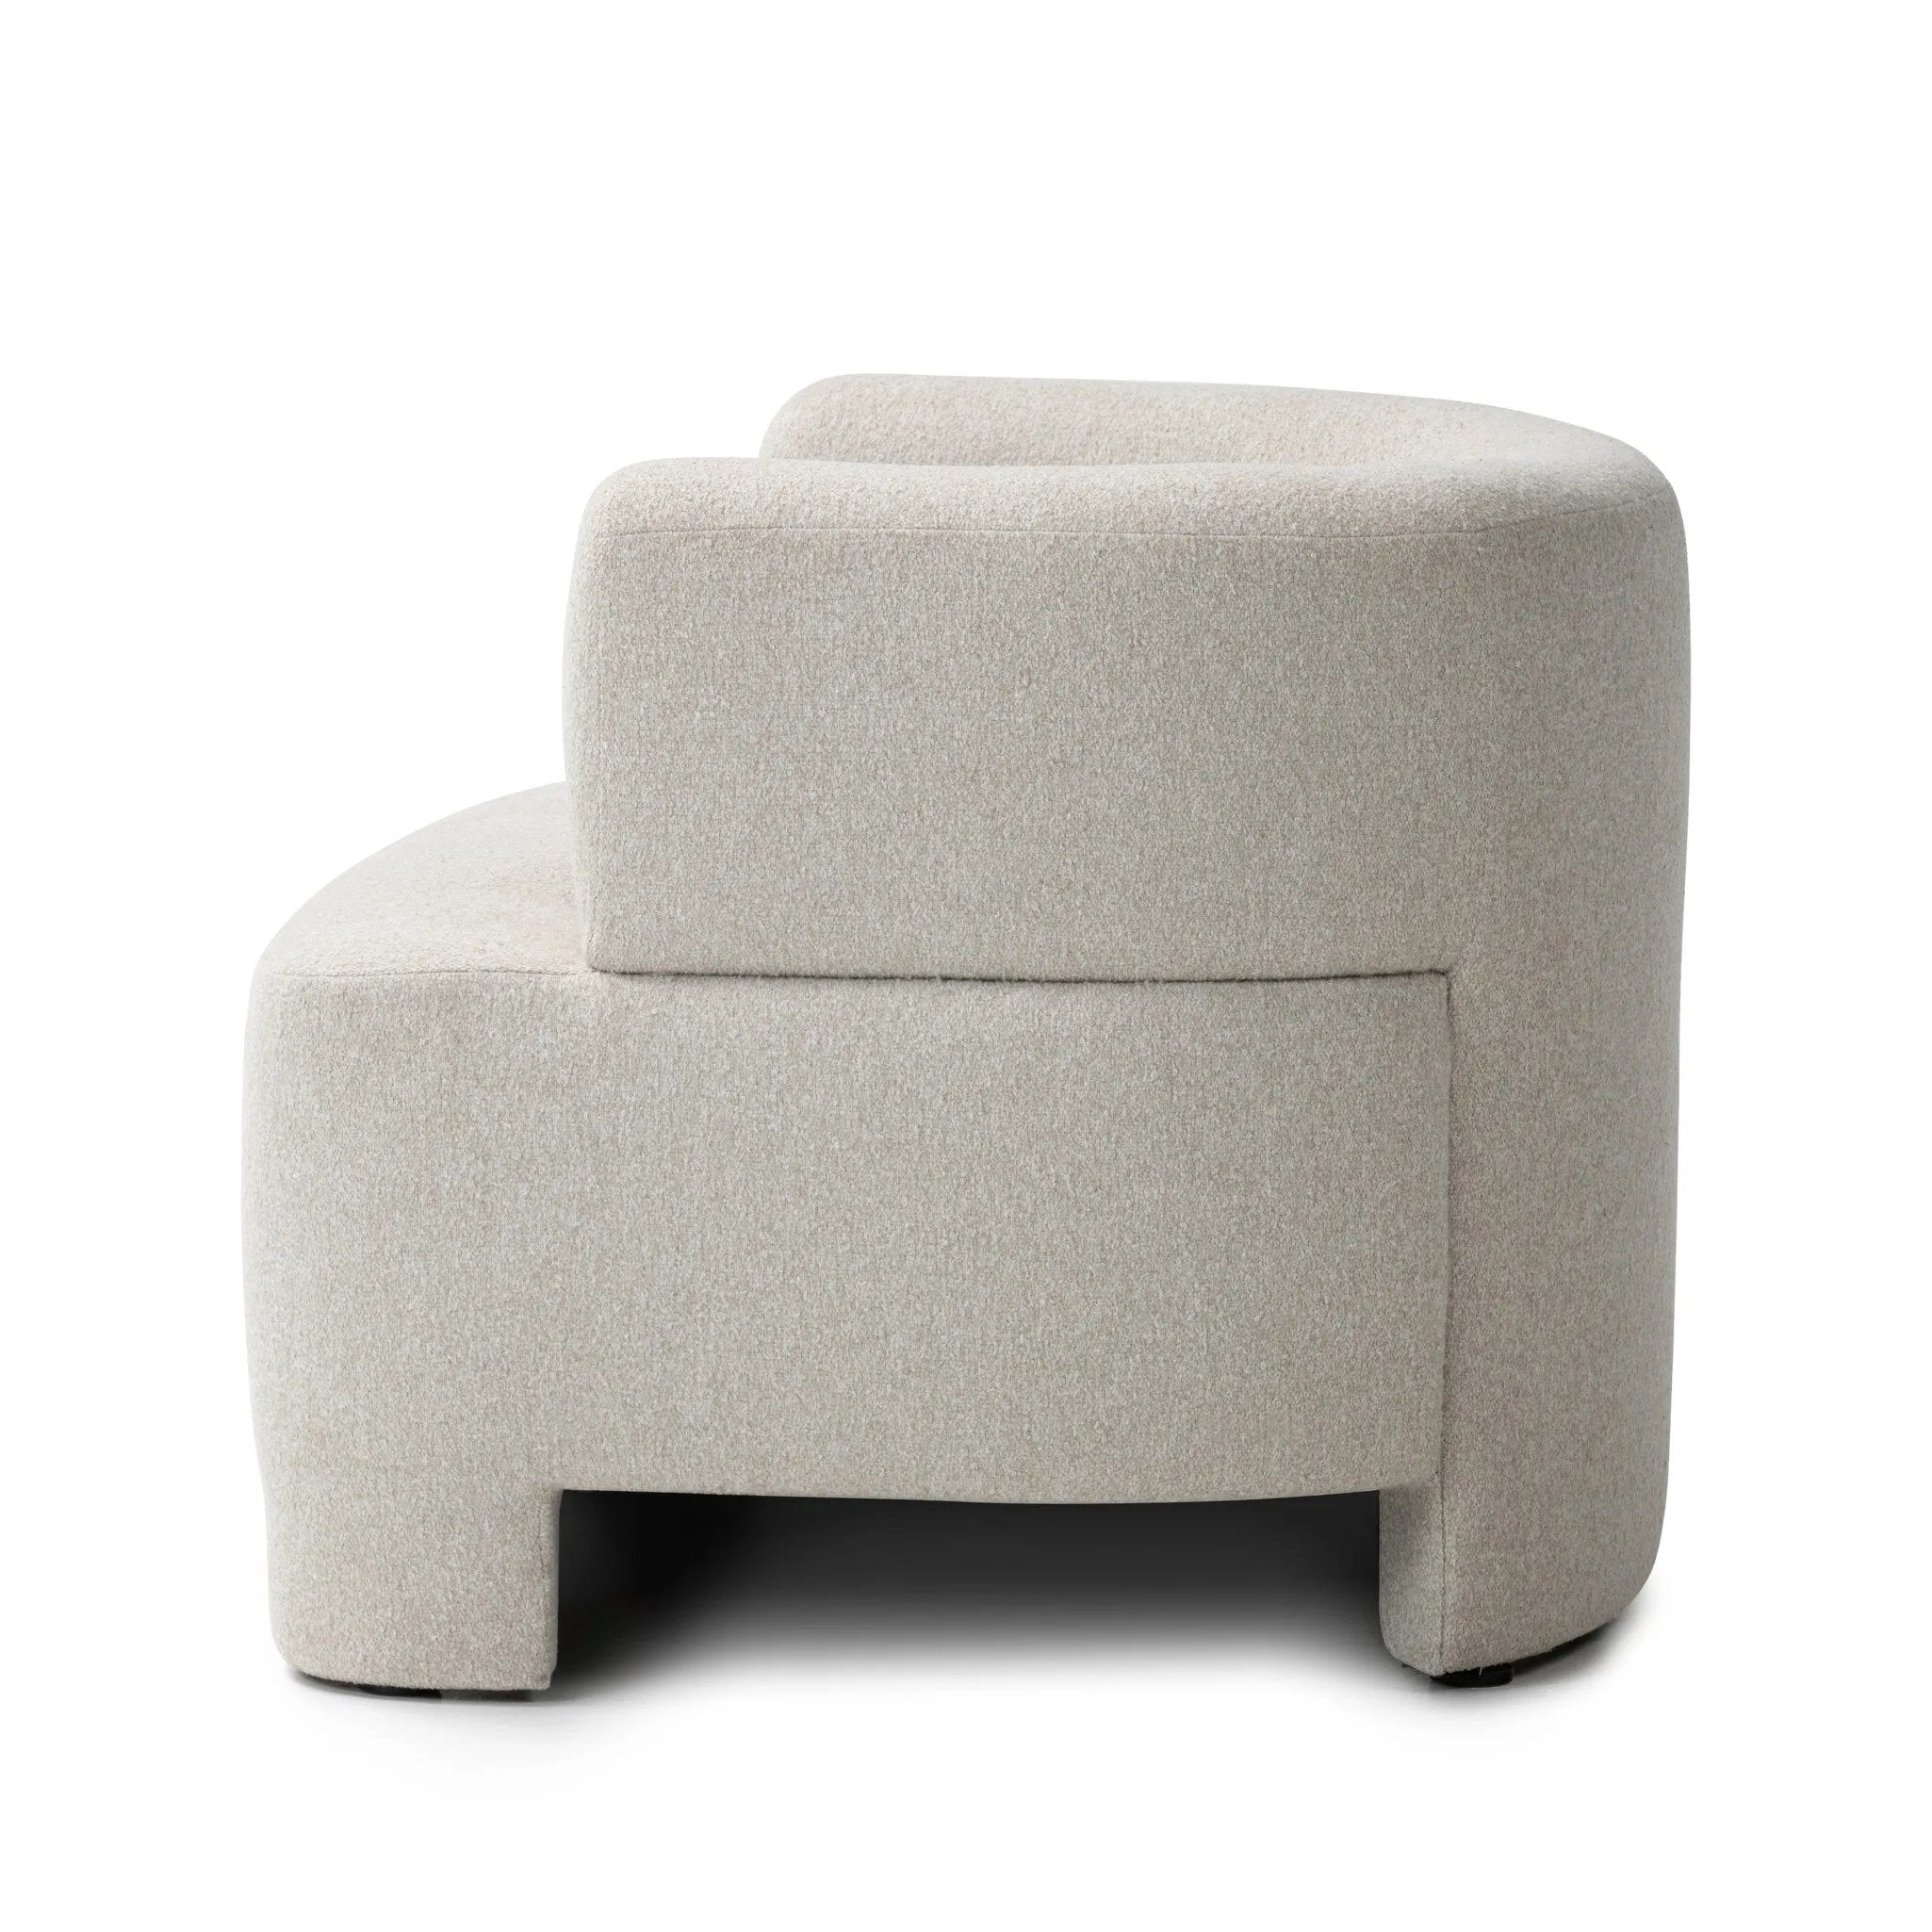 This contemporary wraparound chair melds two forms for a study in seamless balance. The seat's modern form is neutralized with an understated pebble color, while sleek cutouts emphasize the tri-leg base.Collection: Farro Amethyst Home provides interior design, new home construction design consulting, vintage area rugs, and lighting in the Dallas metro area.